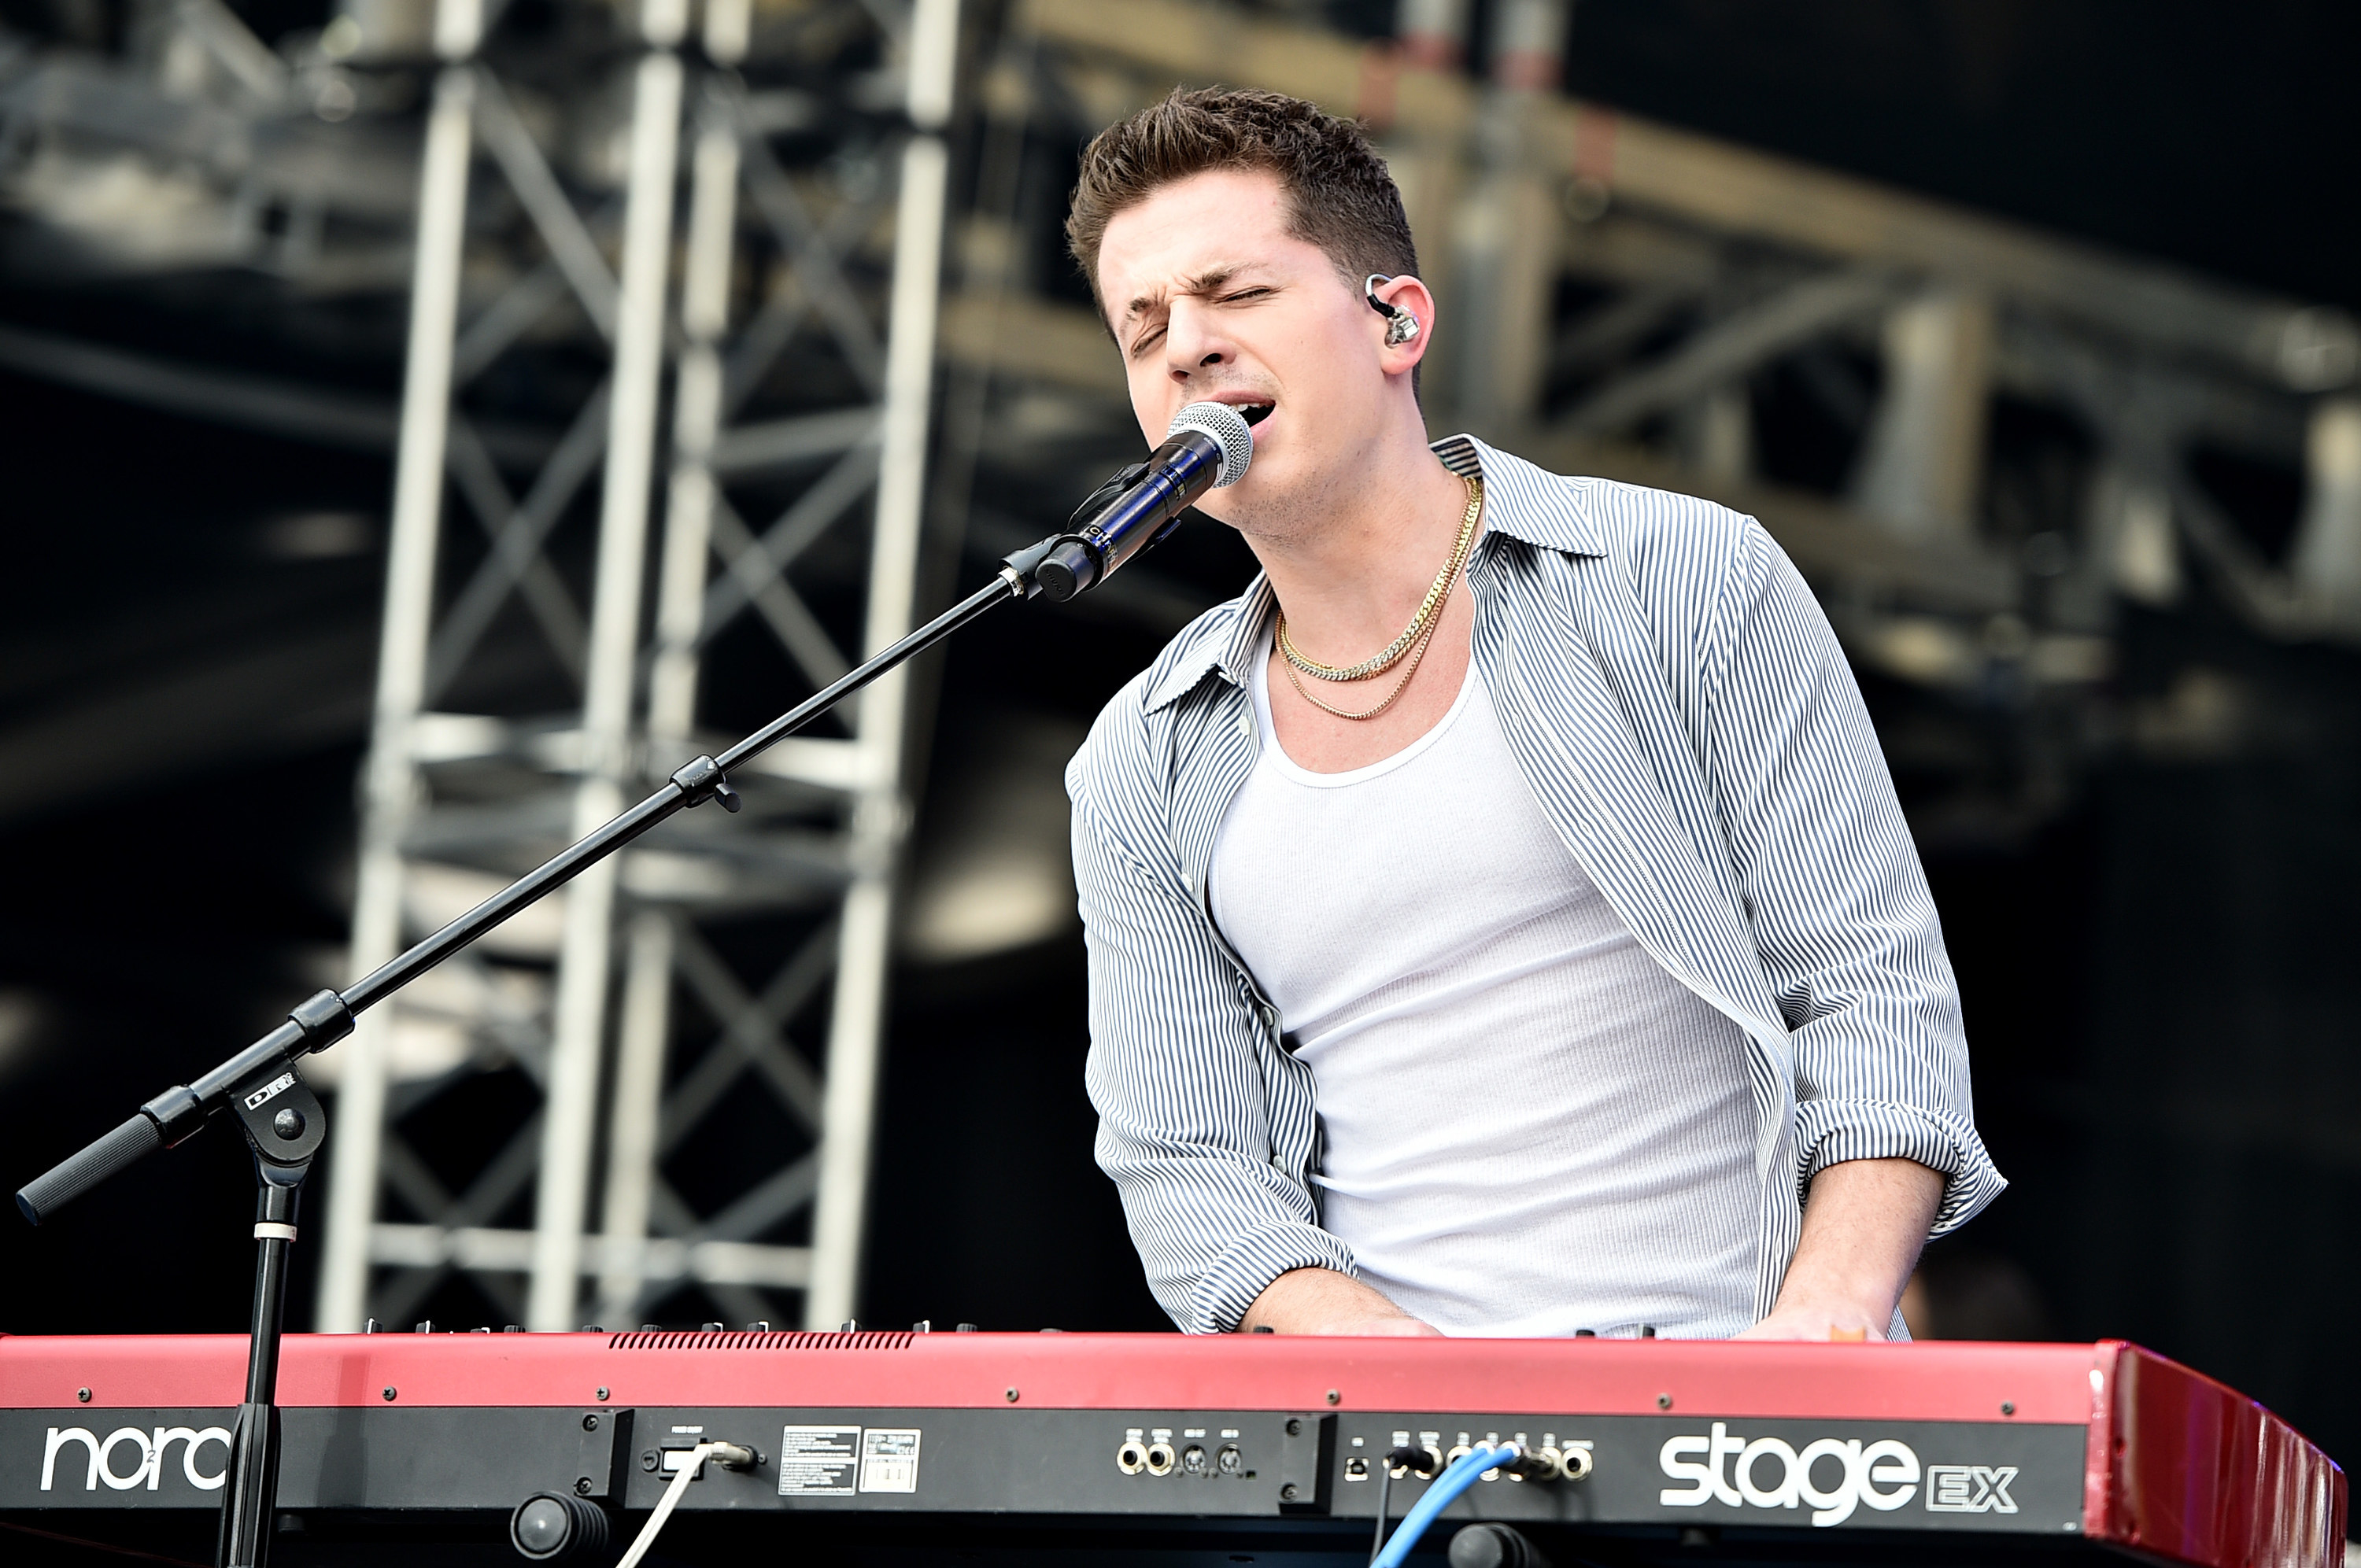 Charlie playing the keyboard and singing onstage